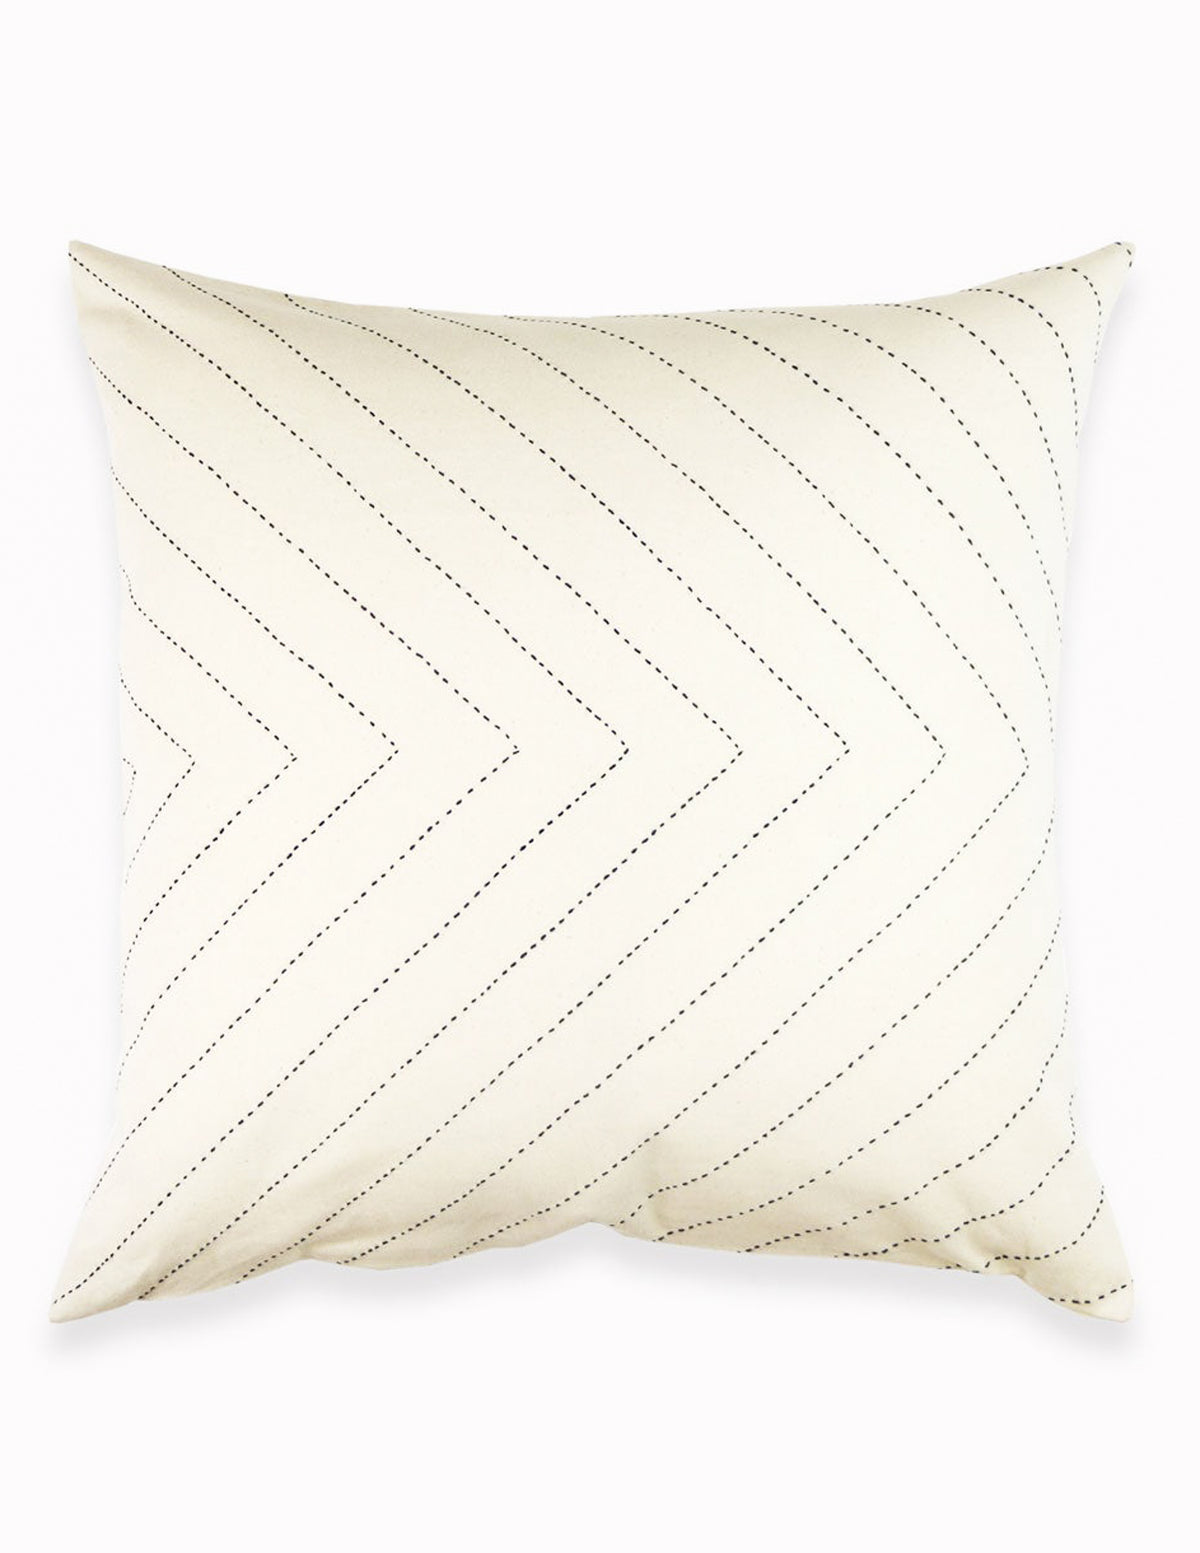 Anchal Project Arrow-Stitch Throw Pillow Cover